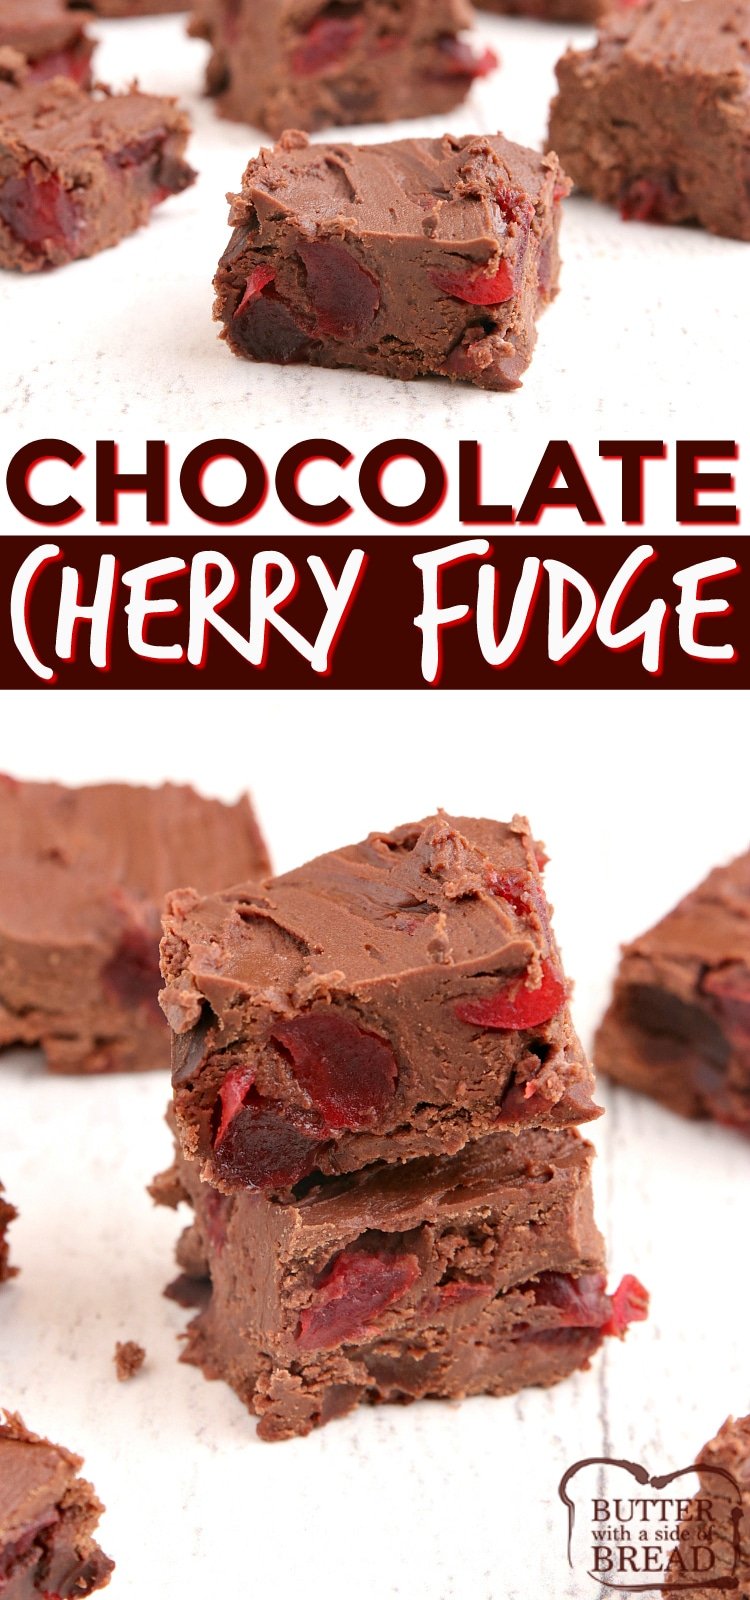 Easy Cherry Chocolate Fudge made with three ingredients in the microwave in less than 3 minutes! Easy fudge recipe ever with tons of cherry and chocolate flavor - no boiling or candy thermometers needed.